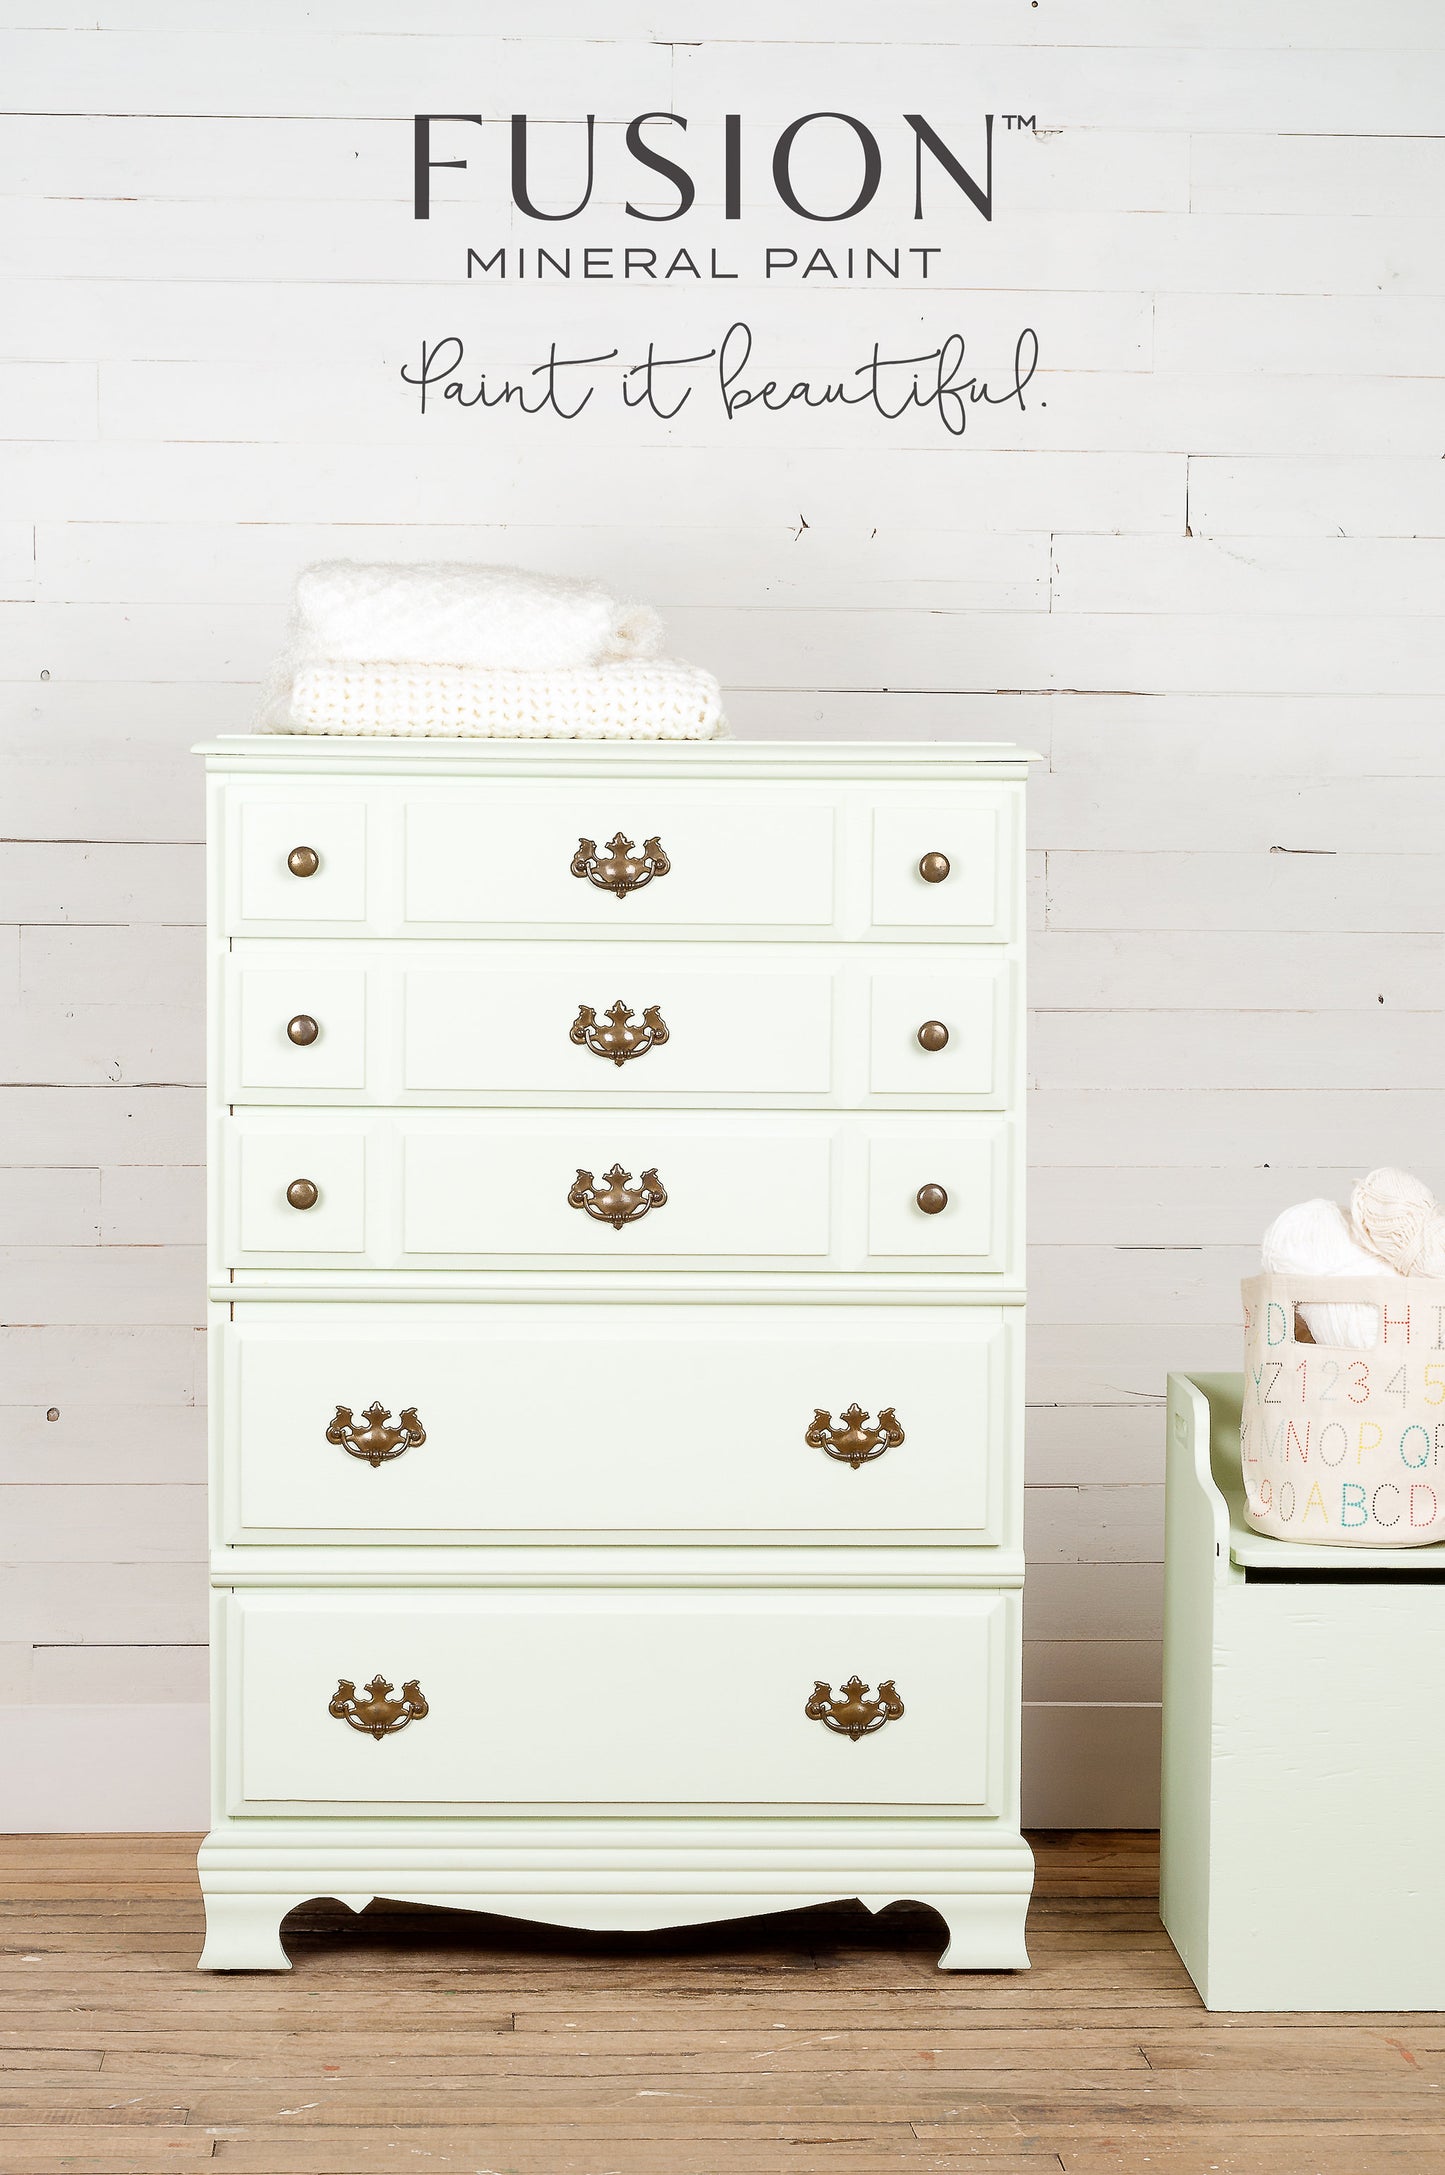 Little Speckled Frog - Fusion Mineral Paint Paint > Fusion Mineral Paint > Furniture Paint 500ml